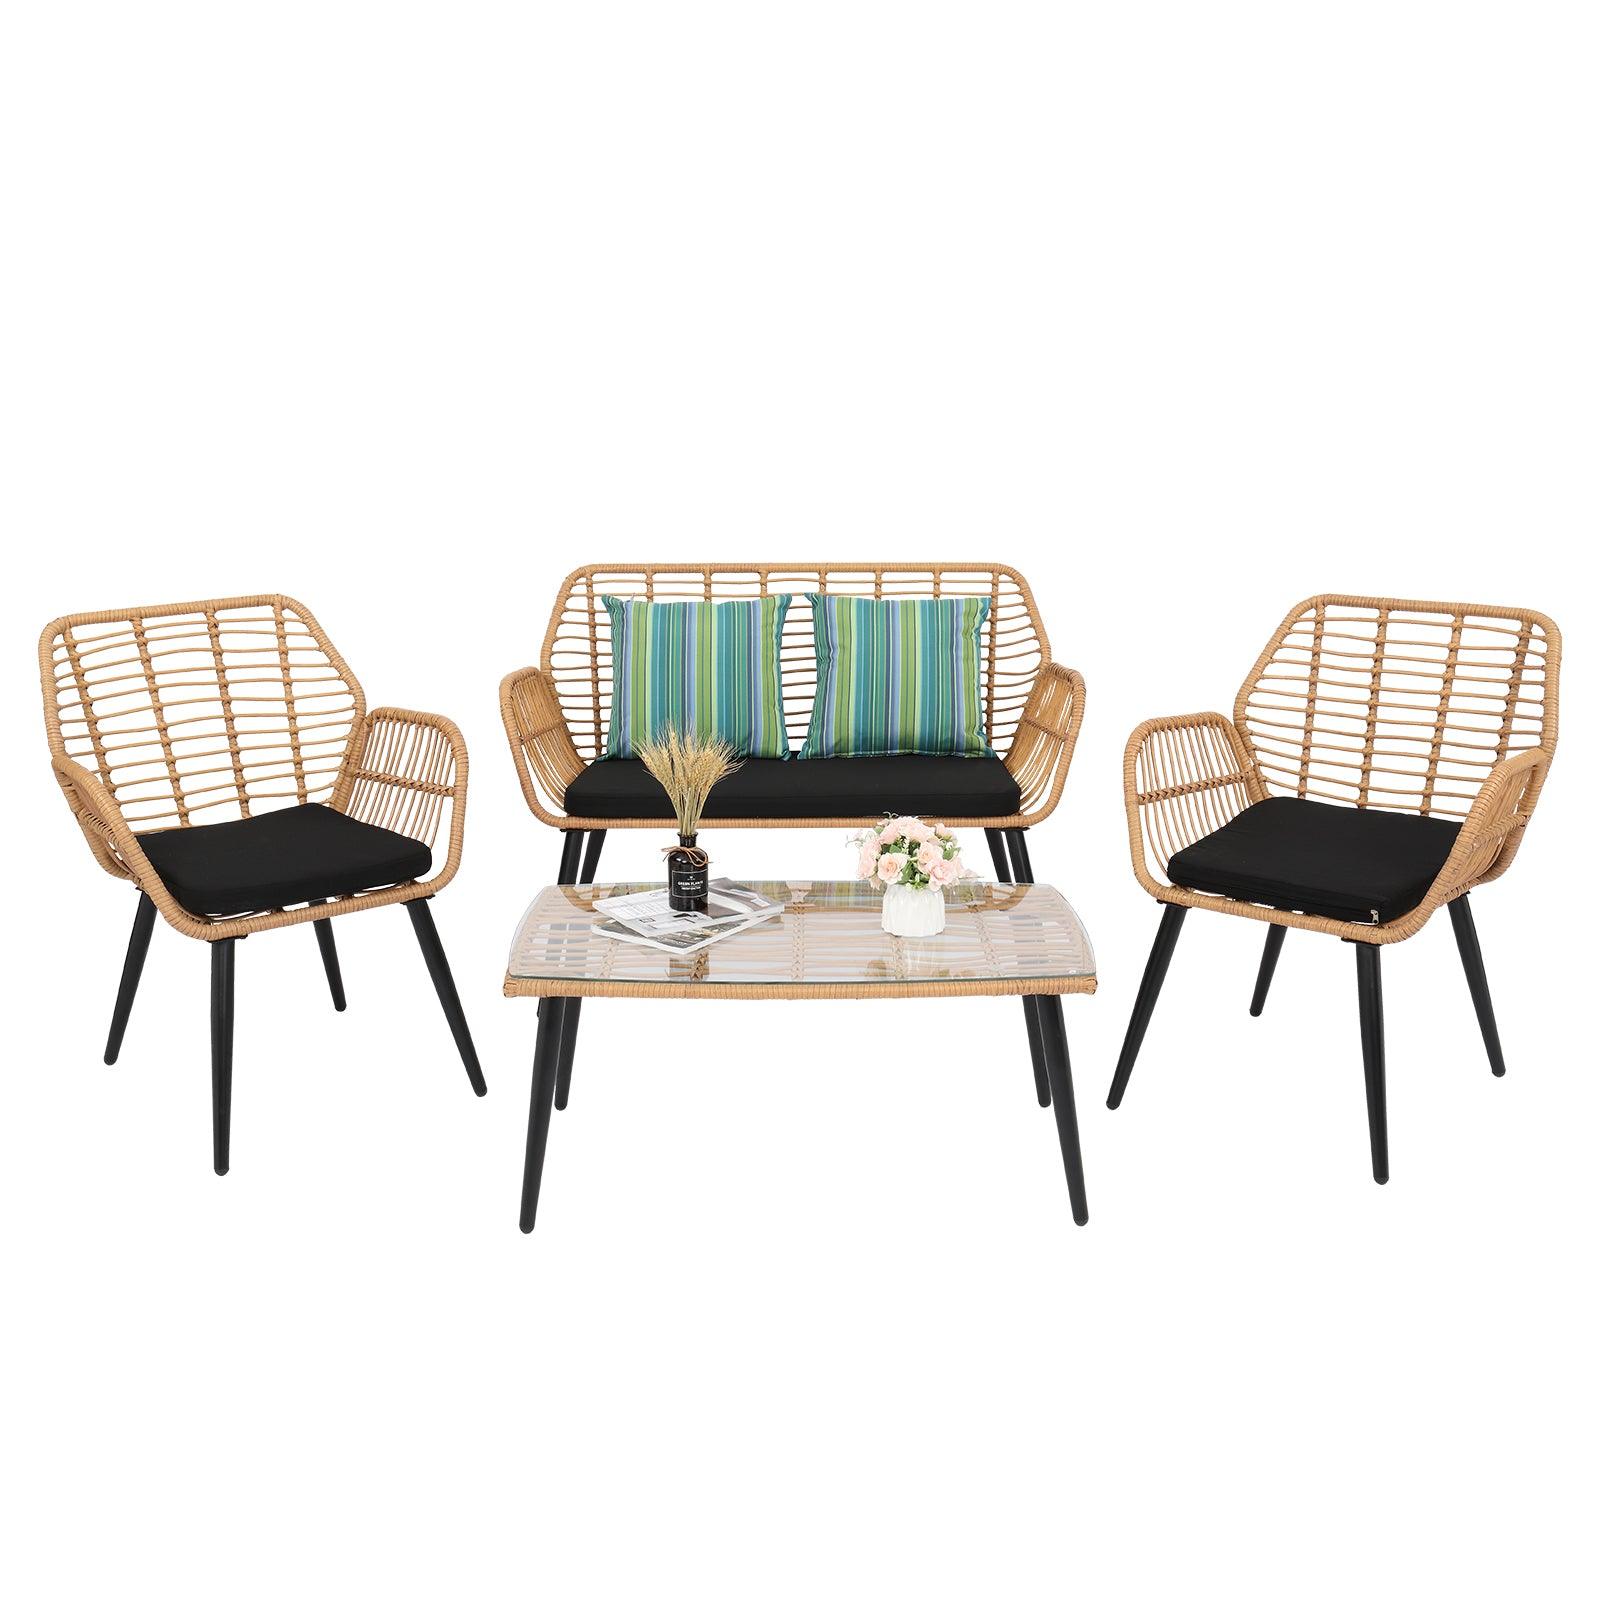 Outdoor Wicker Rattan Chair Four-Piece Patio Furniture Set Yellow, PE Steel - Charming Spaces